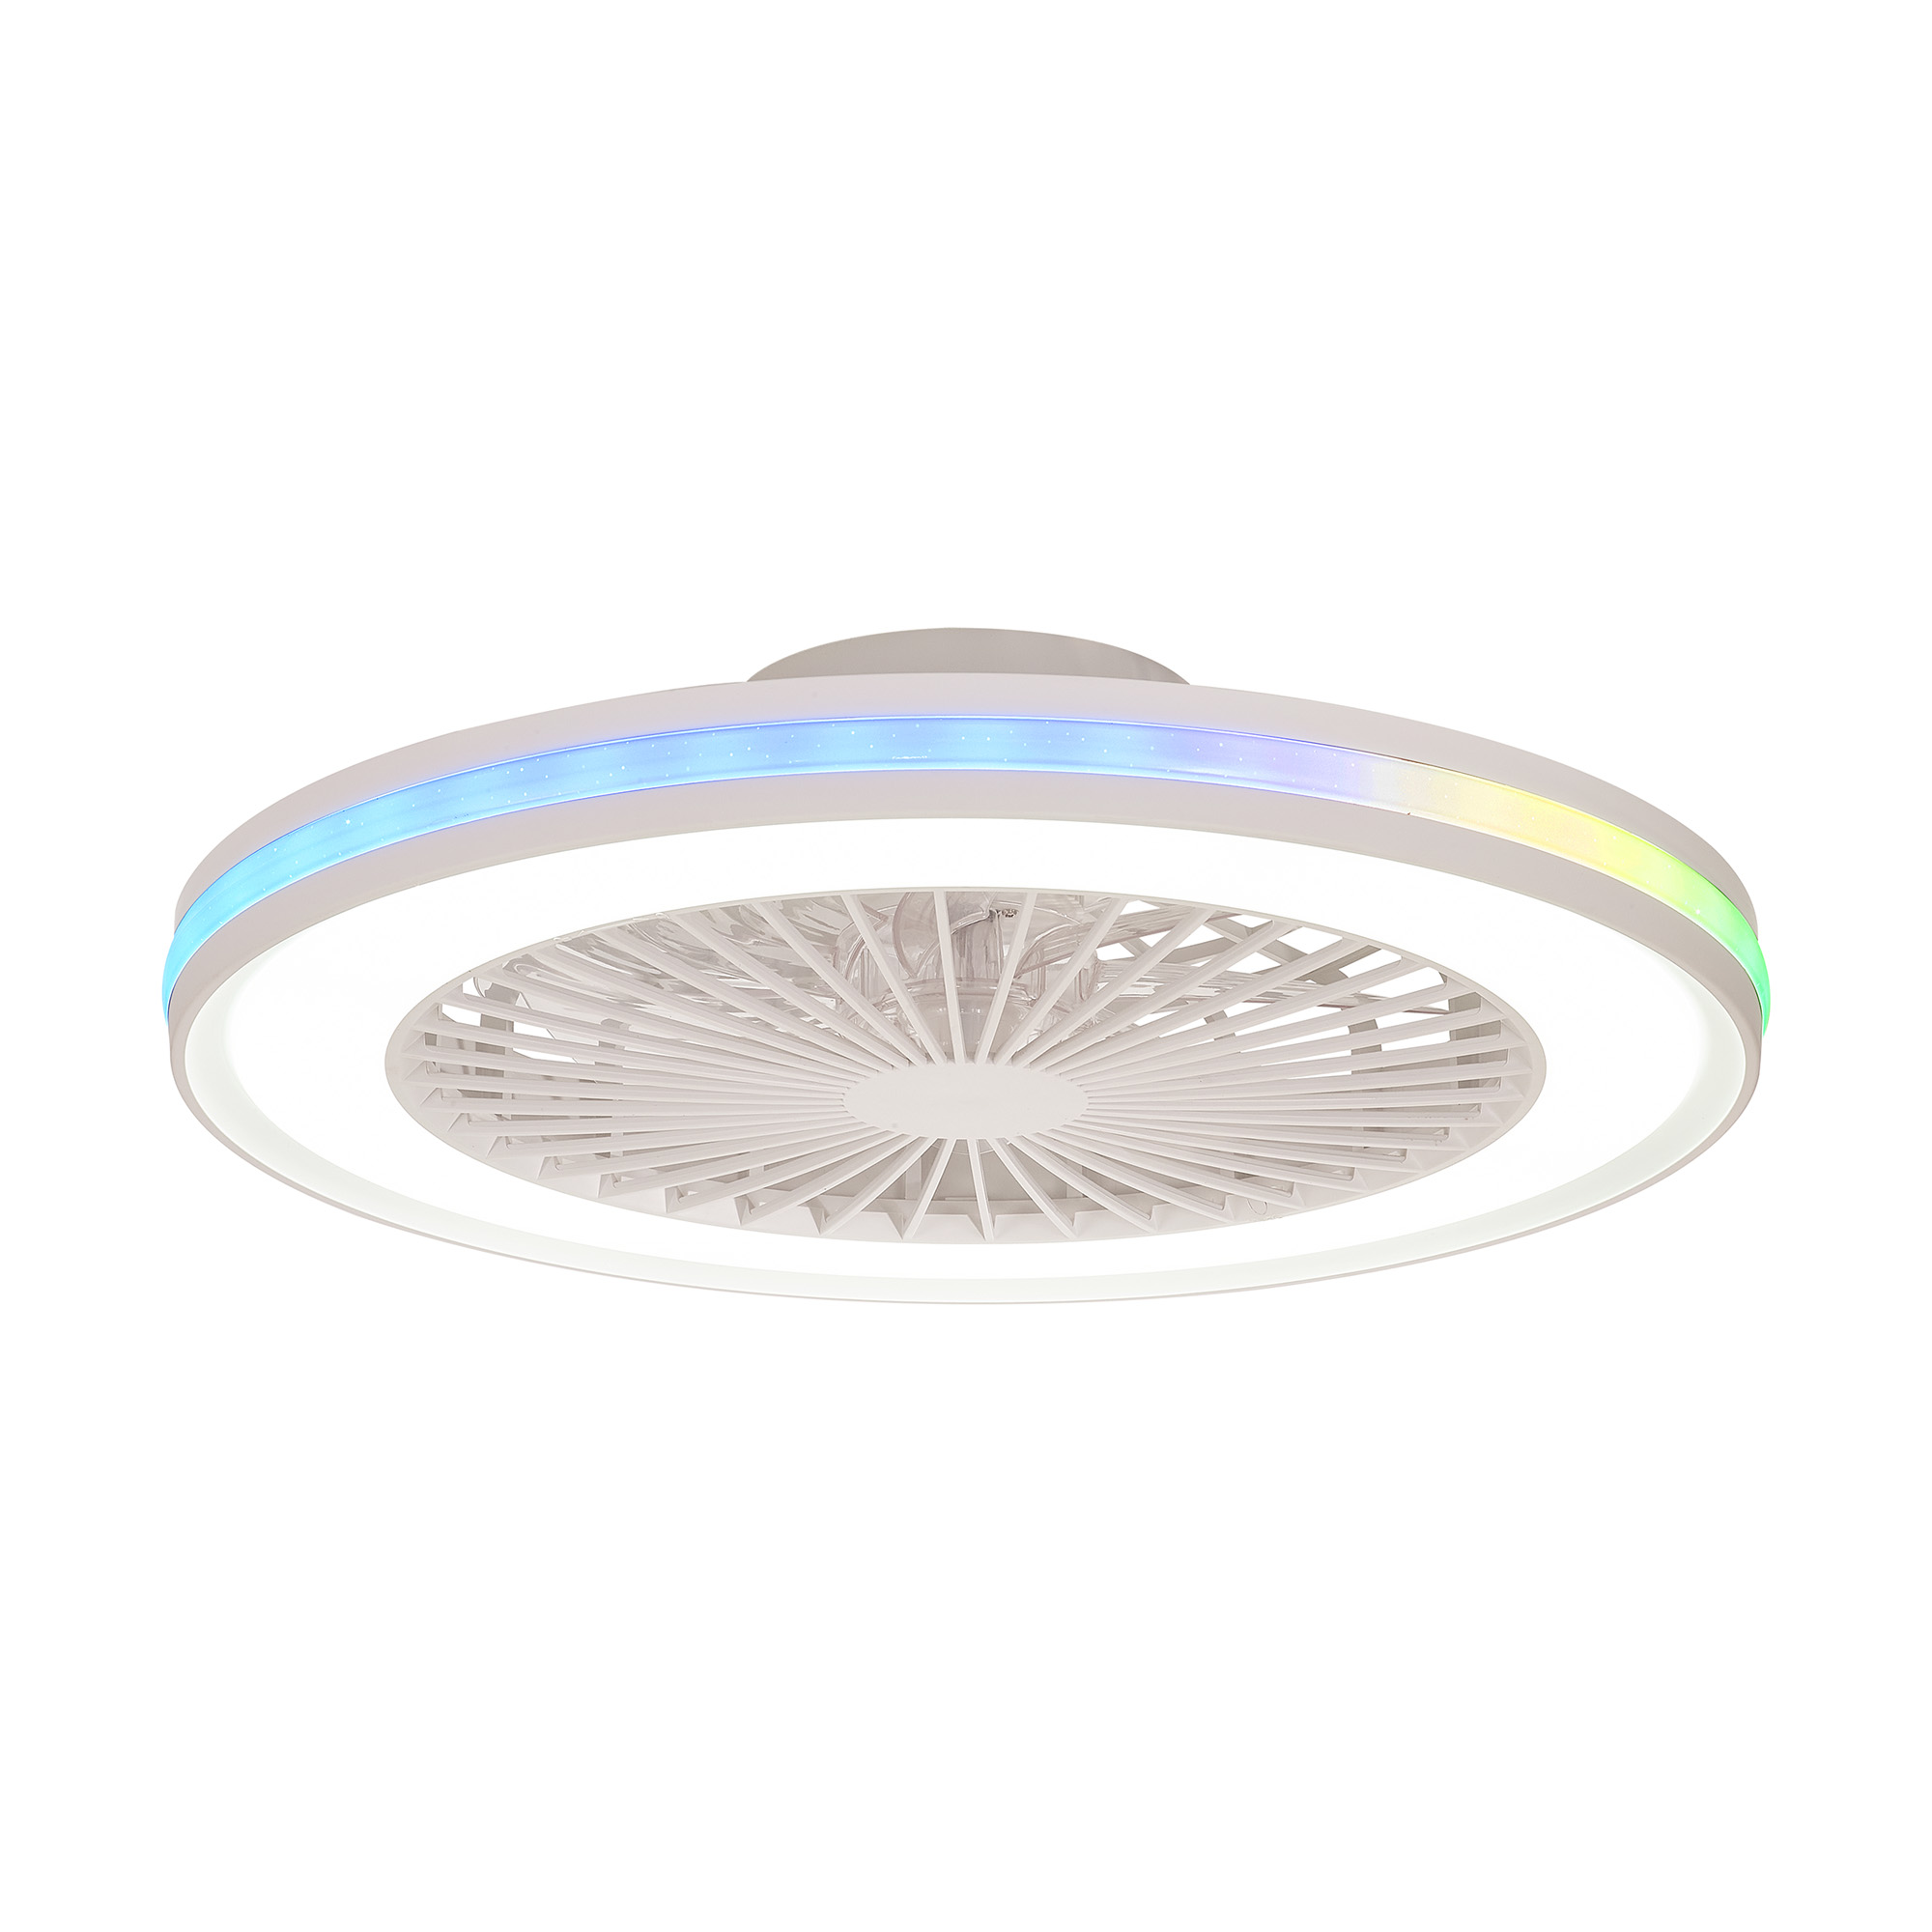 M7861  Gamer 60W LED Dimmable White/RGB Ceiling Light & Fan, Remote